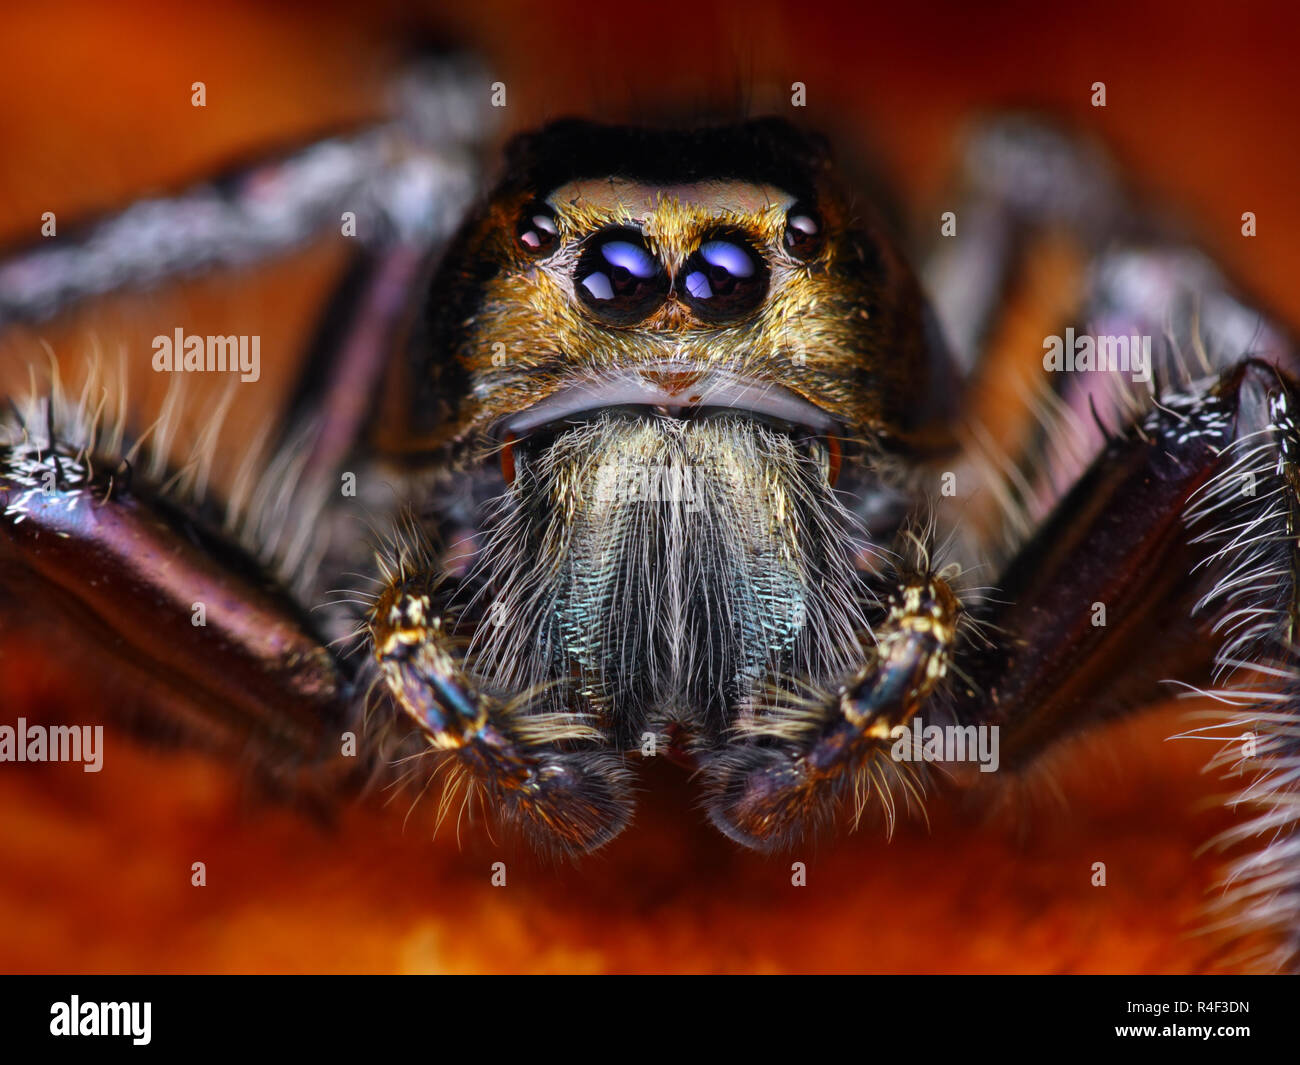 Beautiful close-up of a (Hyllus Diardi) Jumping spider - This is one of the biggest jumping spiders in the world. Stock Photo